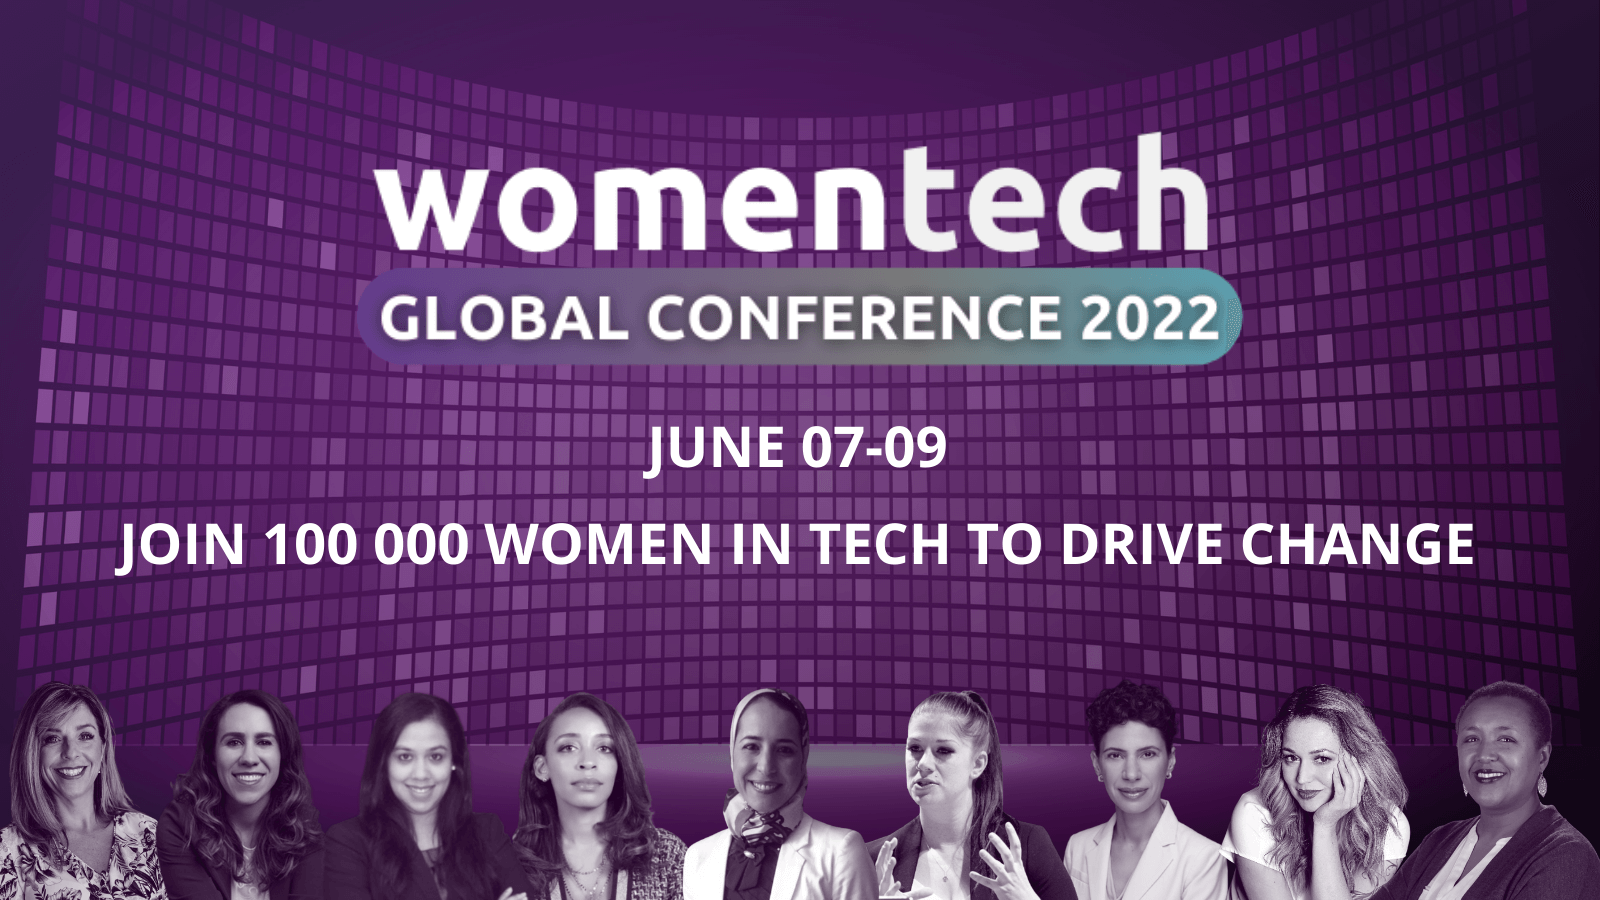 Career Growth Summit at the Women in Tech Conference 2022 Virtual